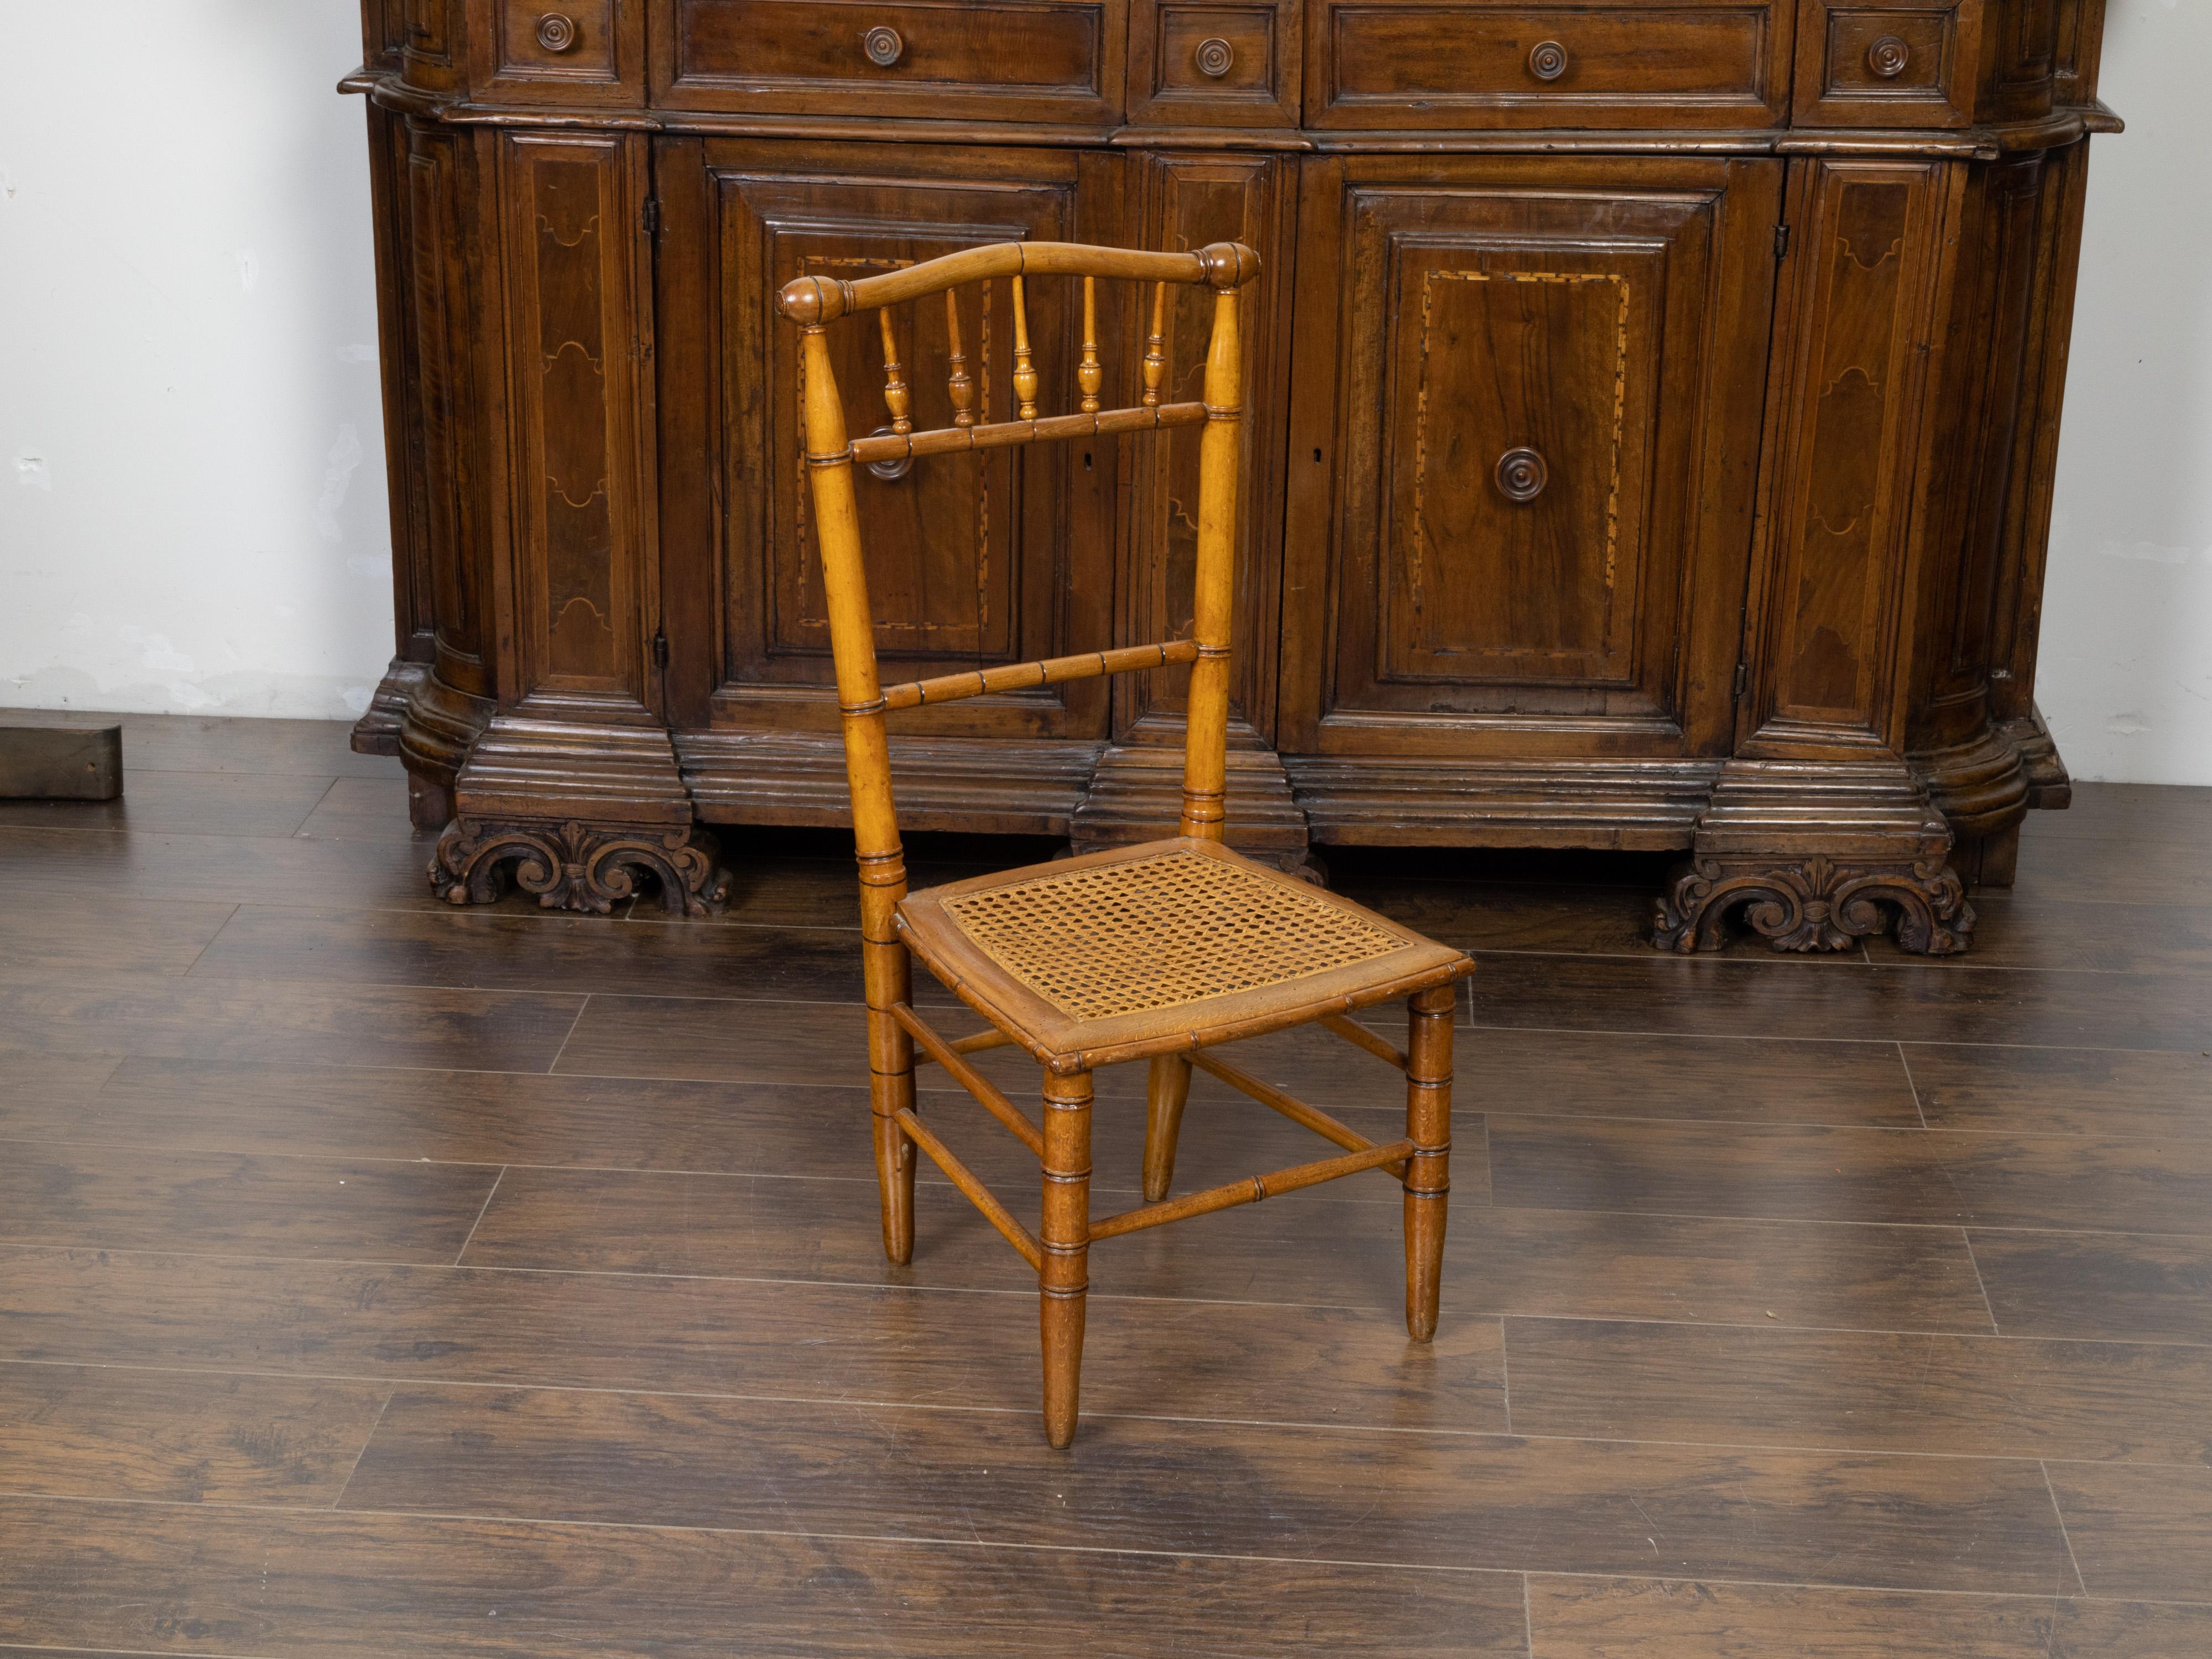 An English Turn of the Century bamboo slipper chair from the early 20th century, with cane seat. Created in England during the early years of the 20th century, this bamboo slipper chair features a spindle back with curving upper rail, sitting on a